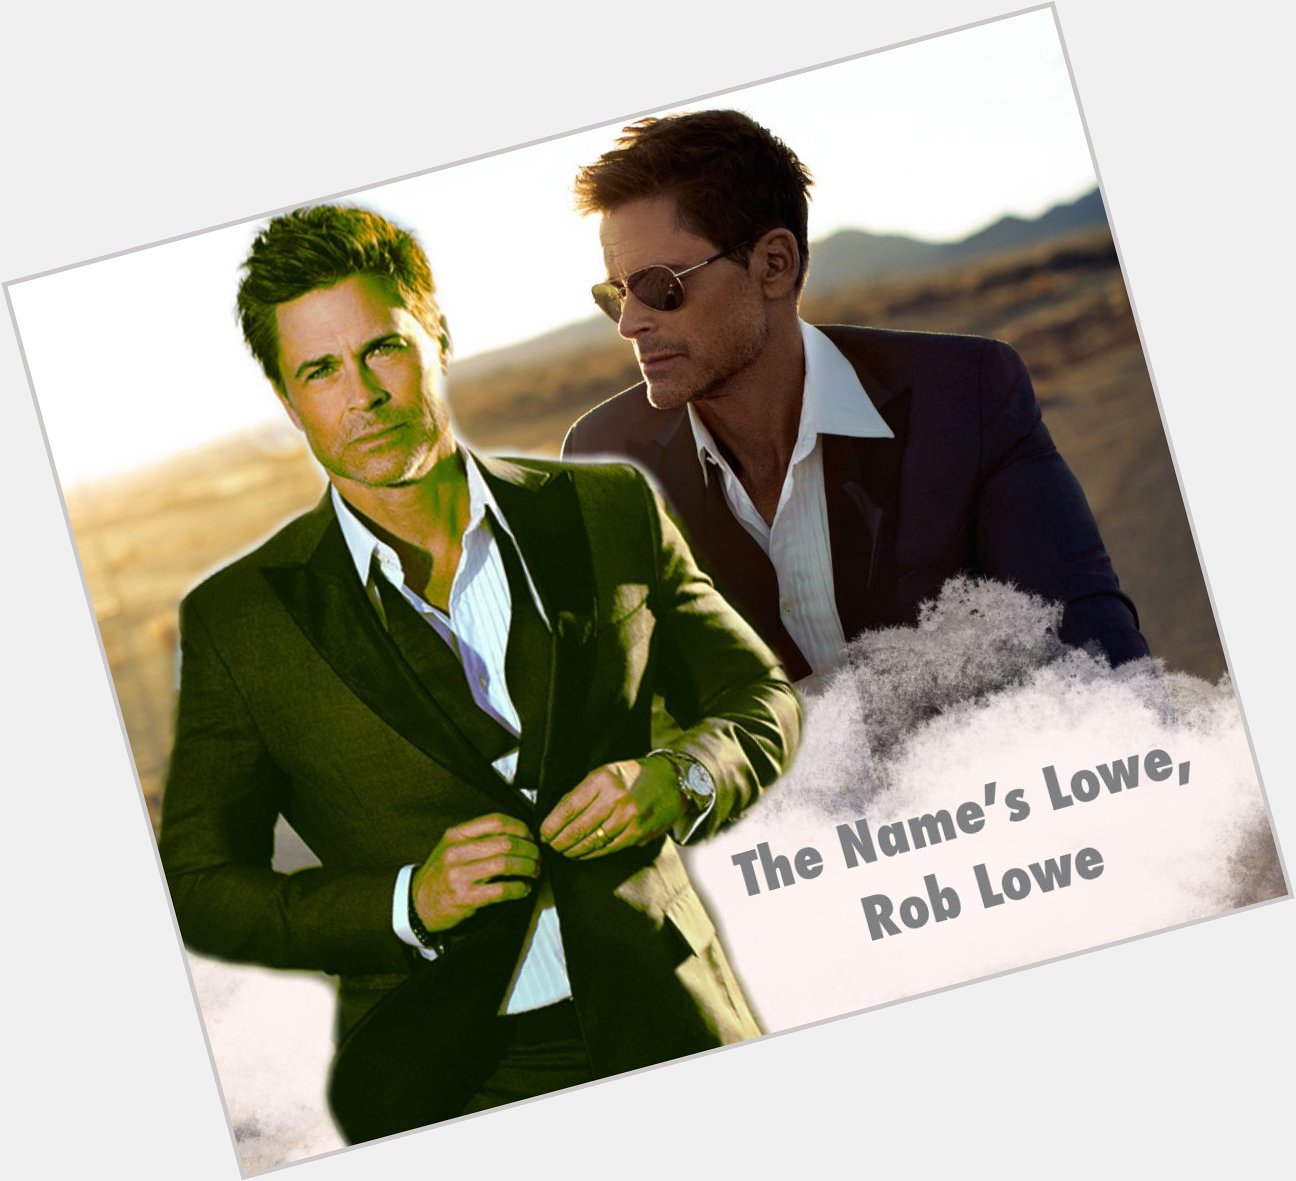 Happy Birthday to Rob Lowe
I created this piece of art & thought today would be be the day to share it. 